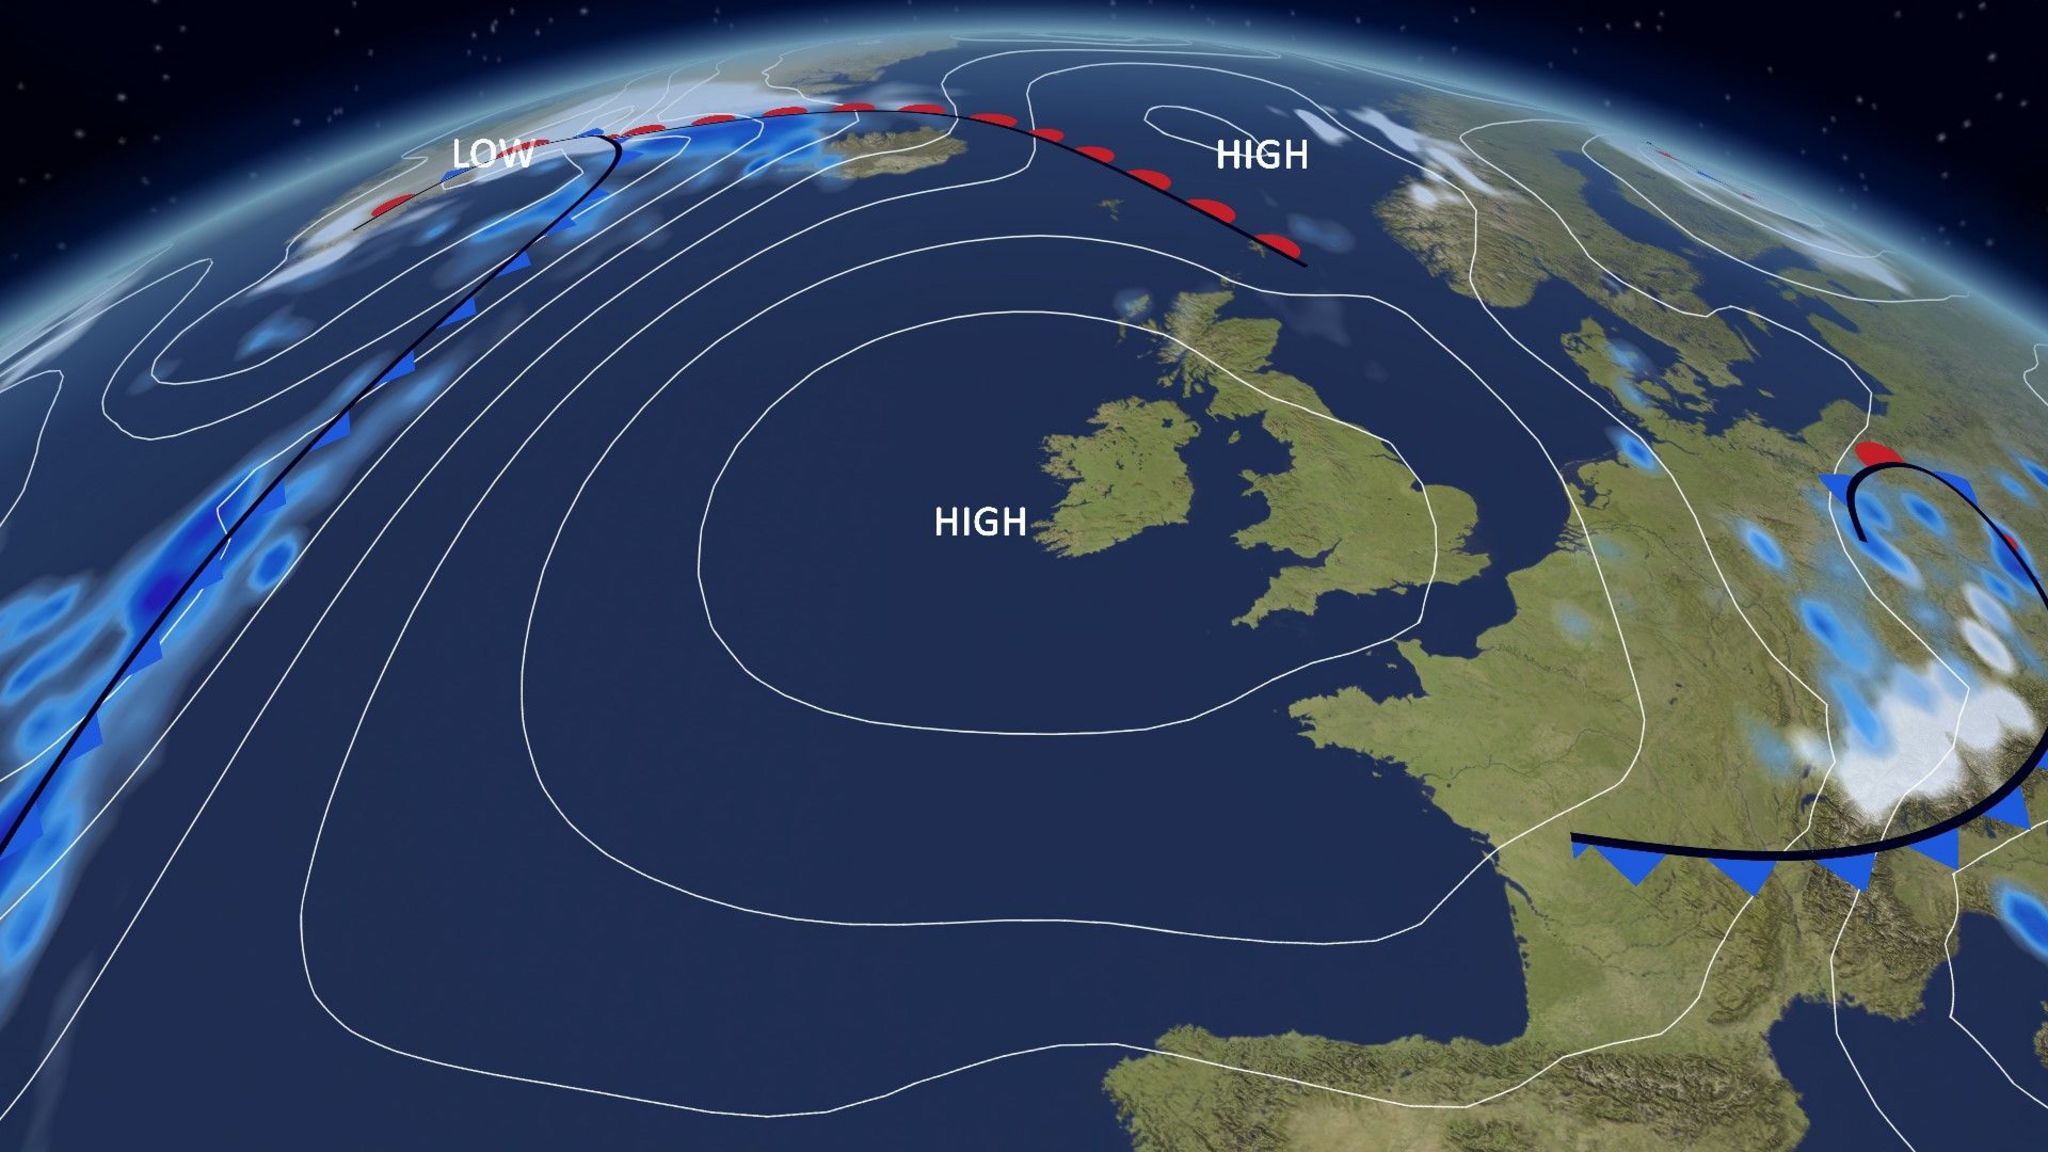 BBC Weather pressure chart showing an area of high pressure over the UK and Ireland